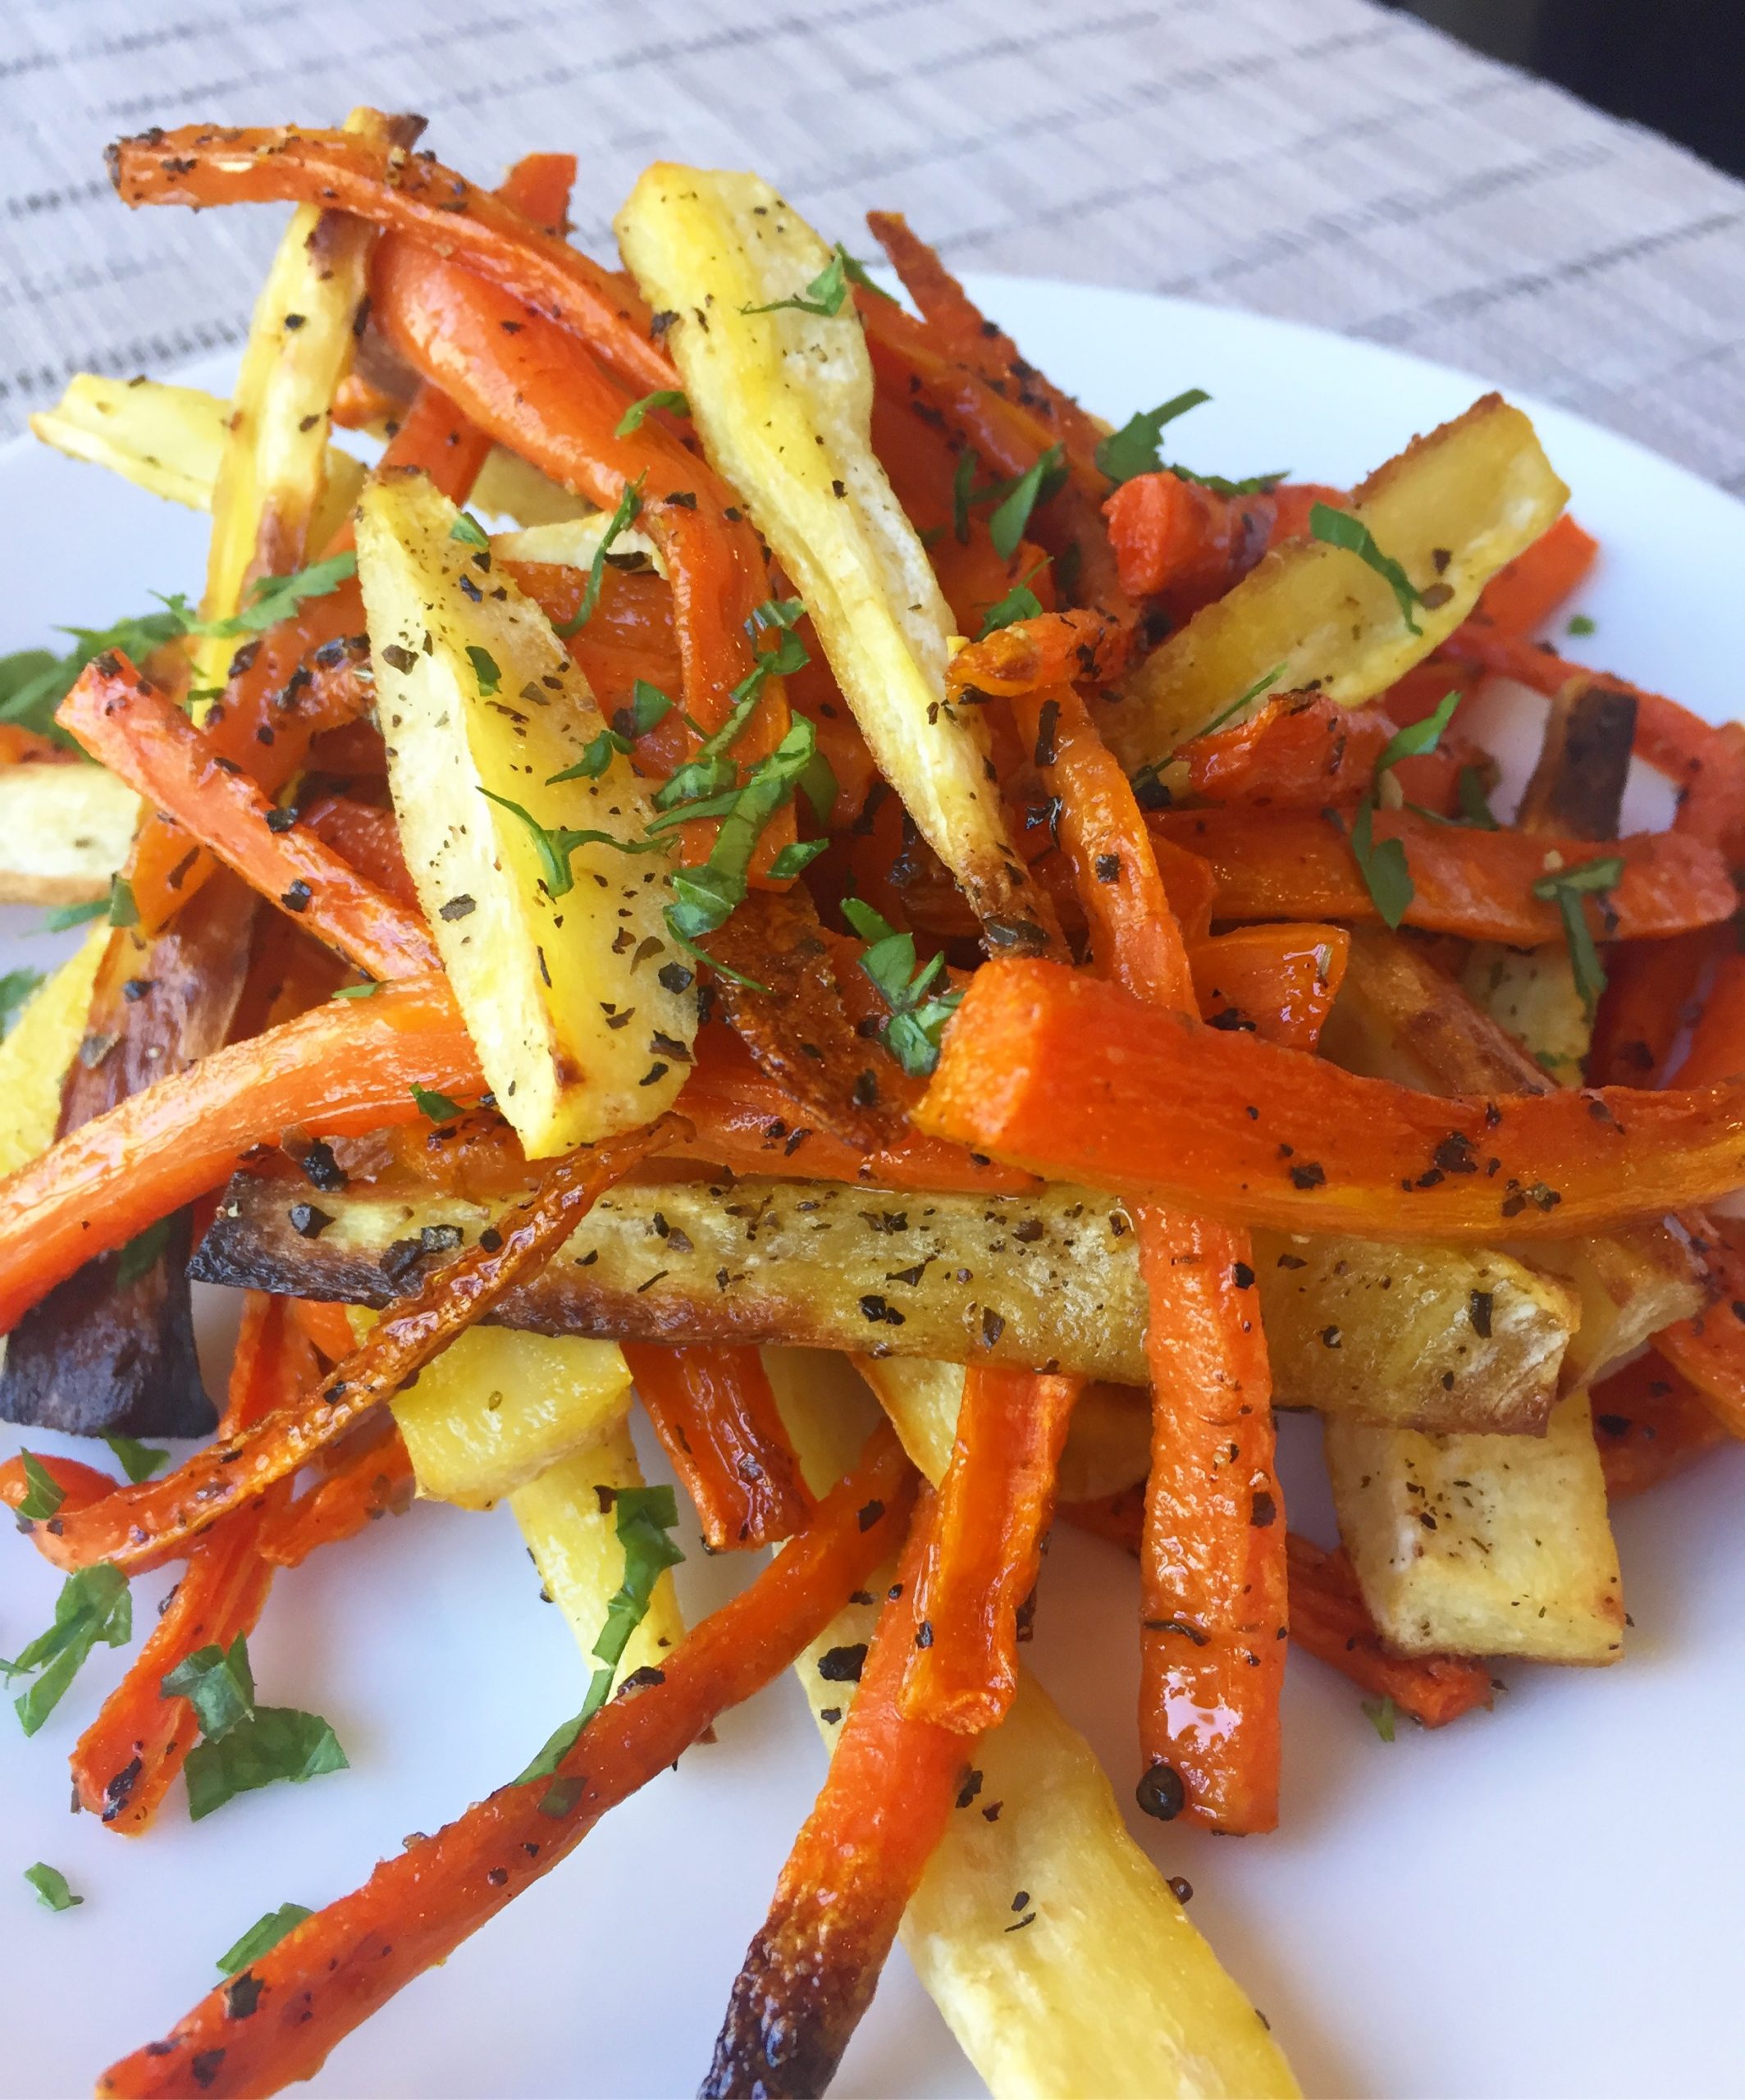 roasted carrot and parsnip